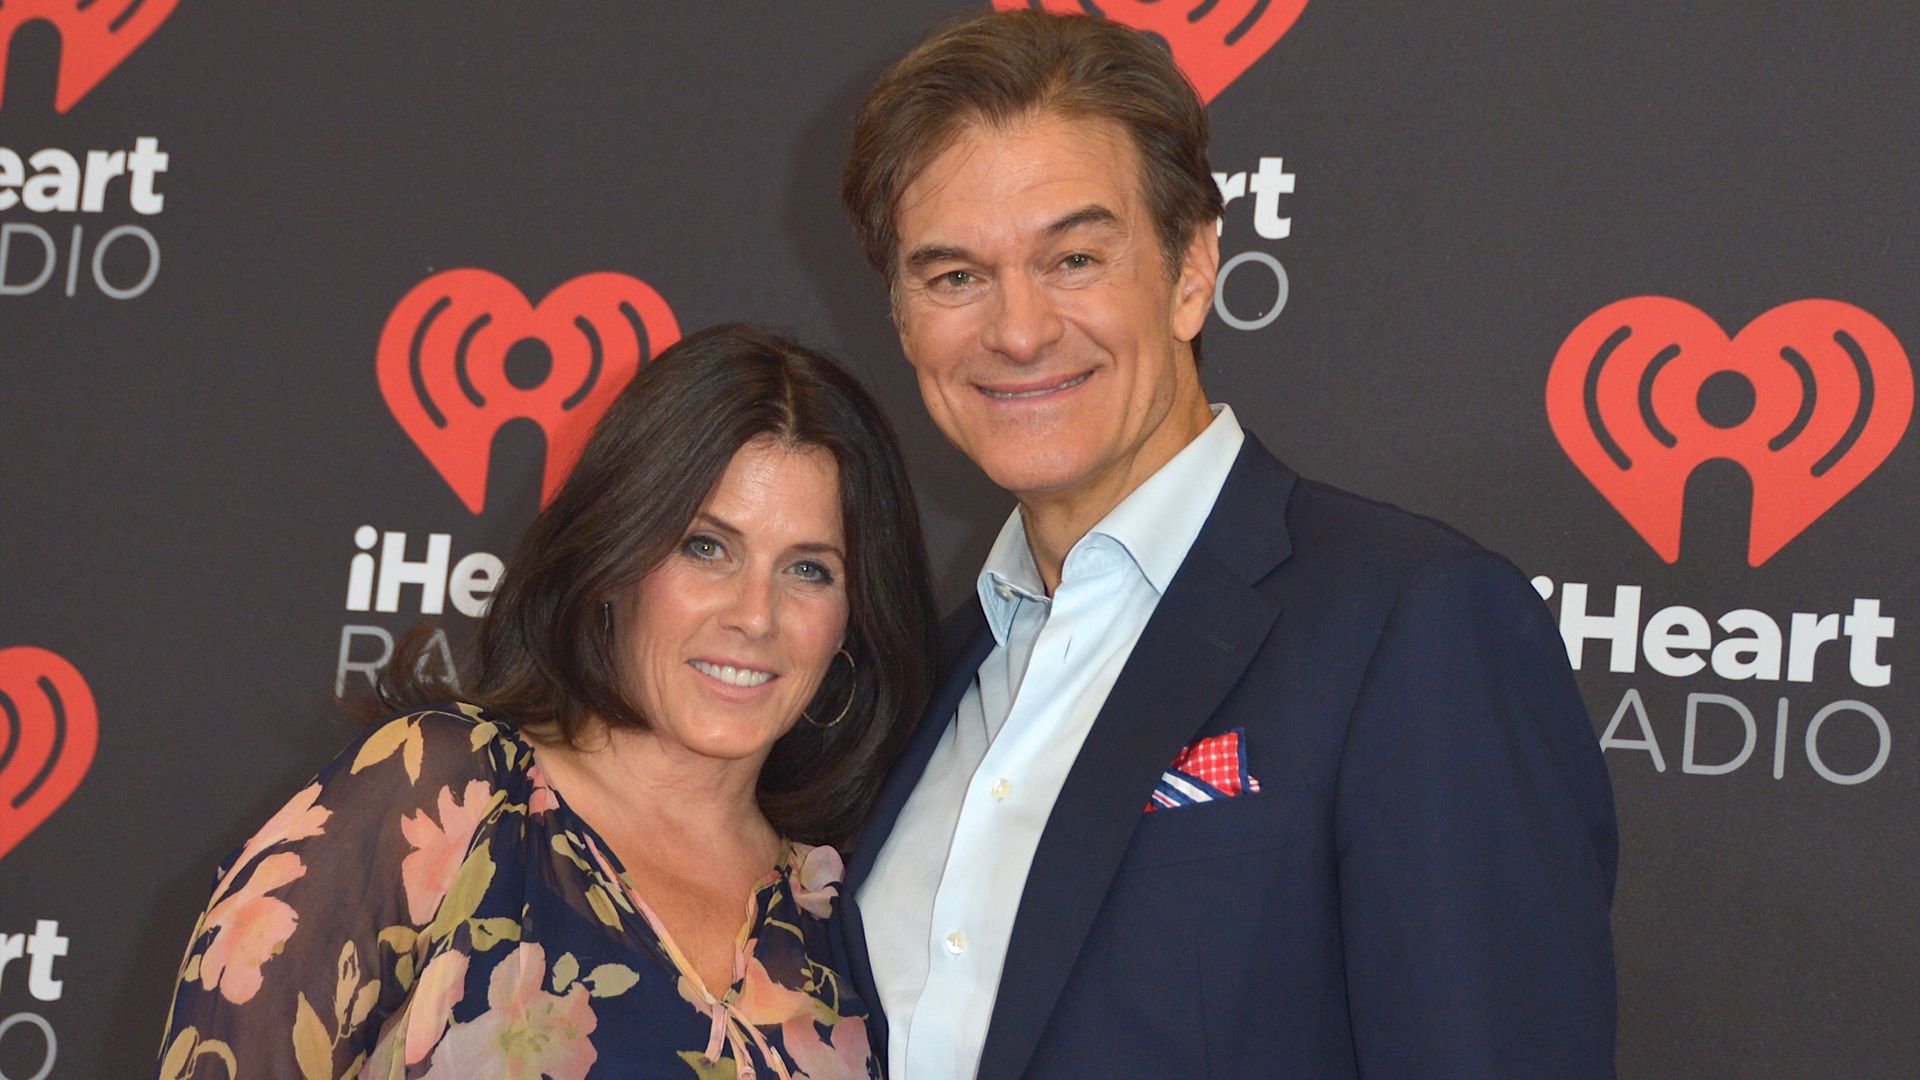 Dr. Oz with wife Lisa